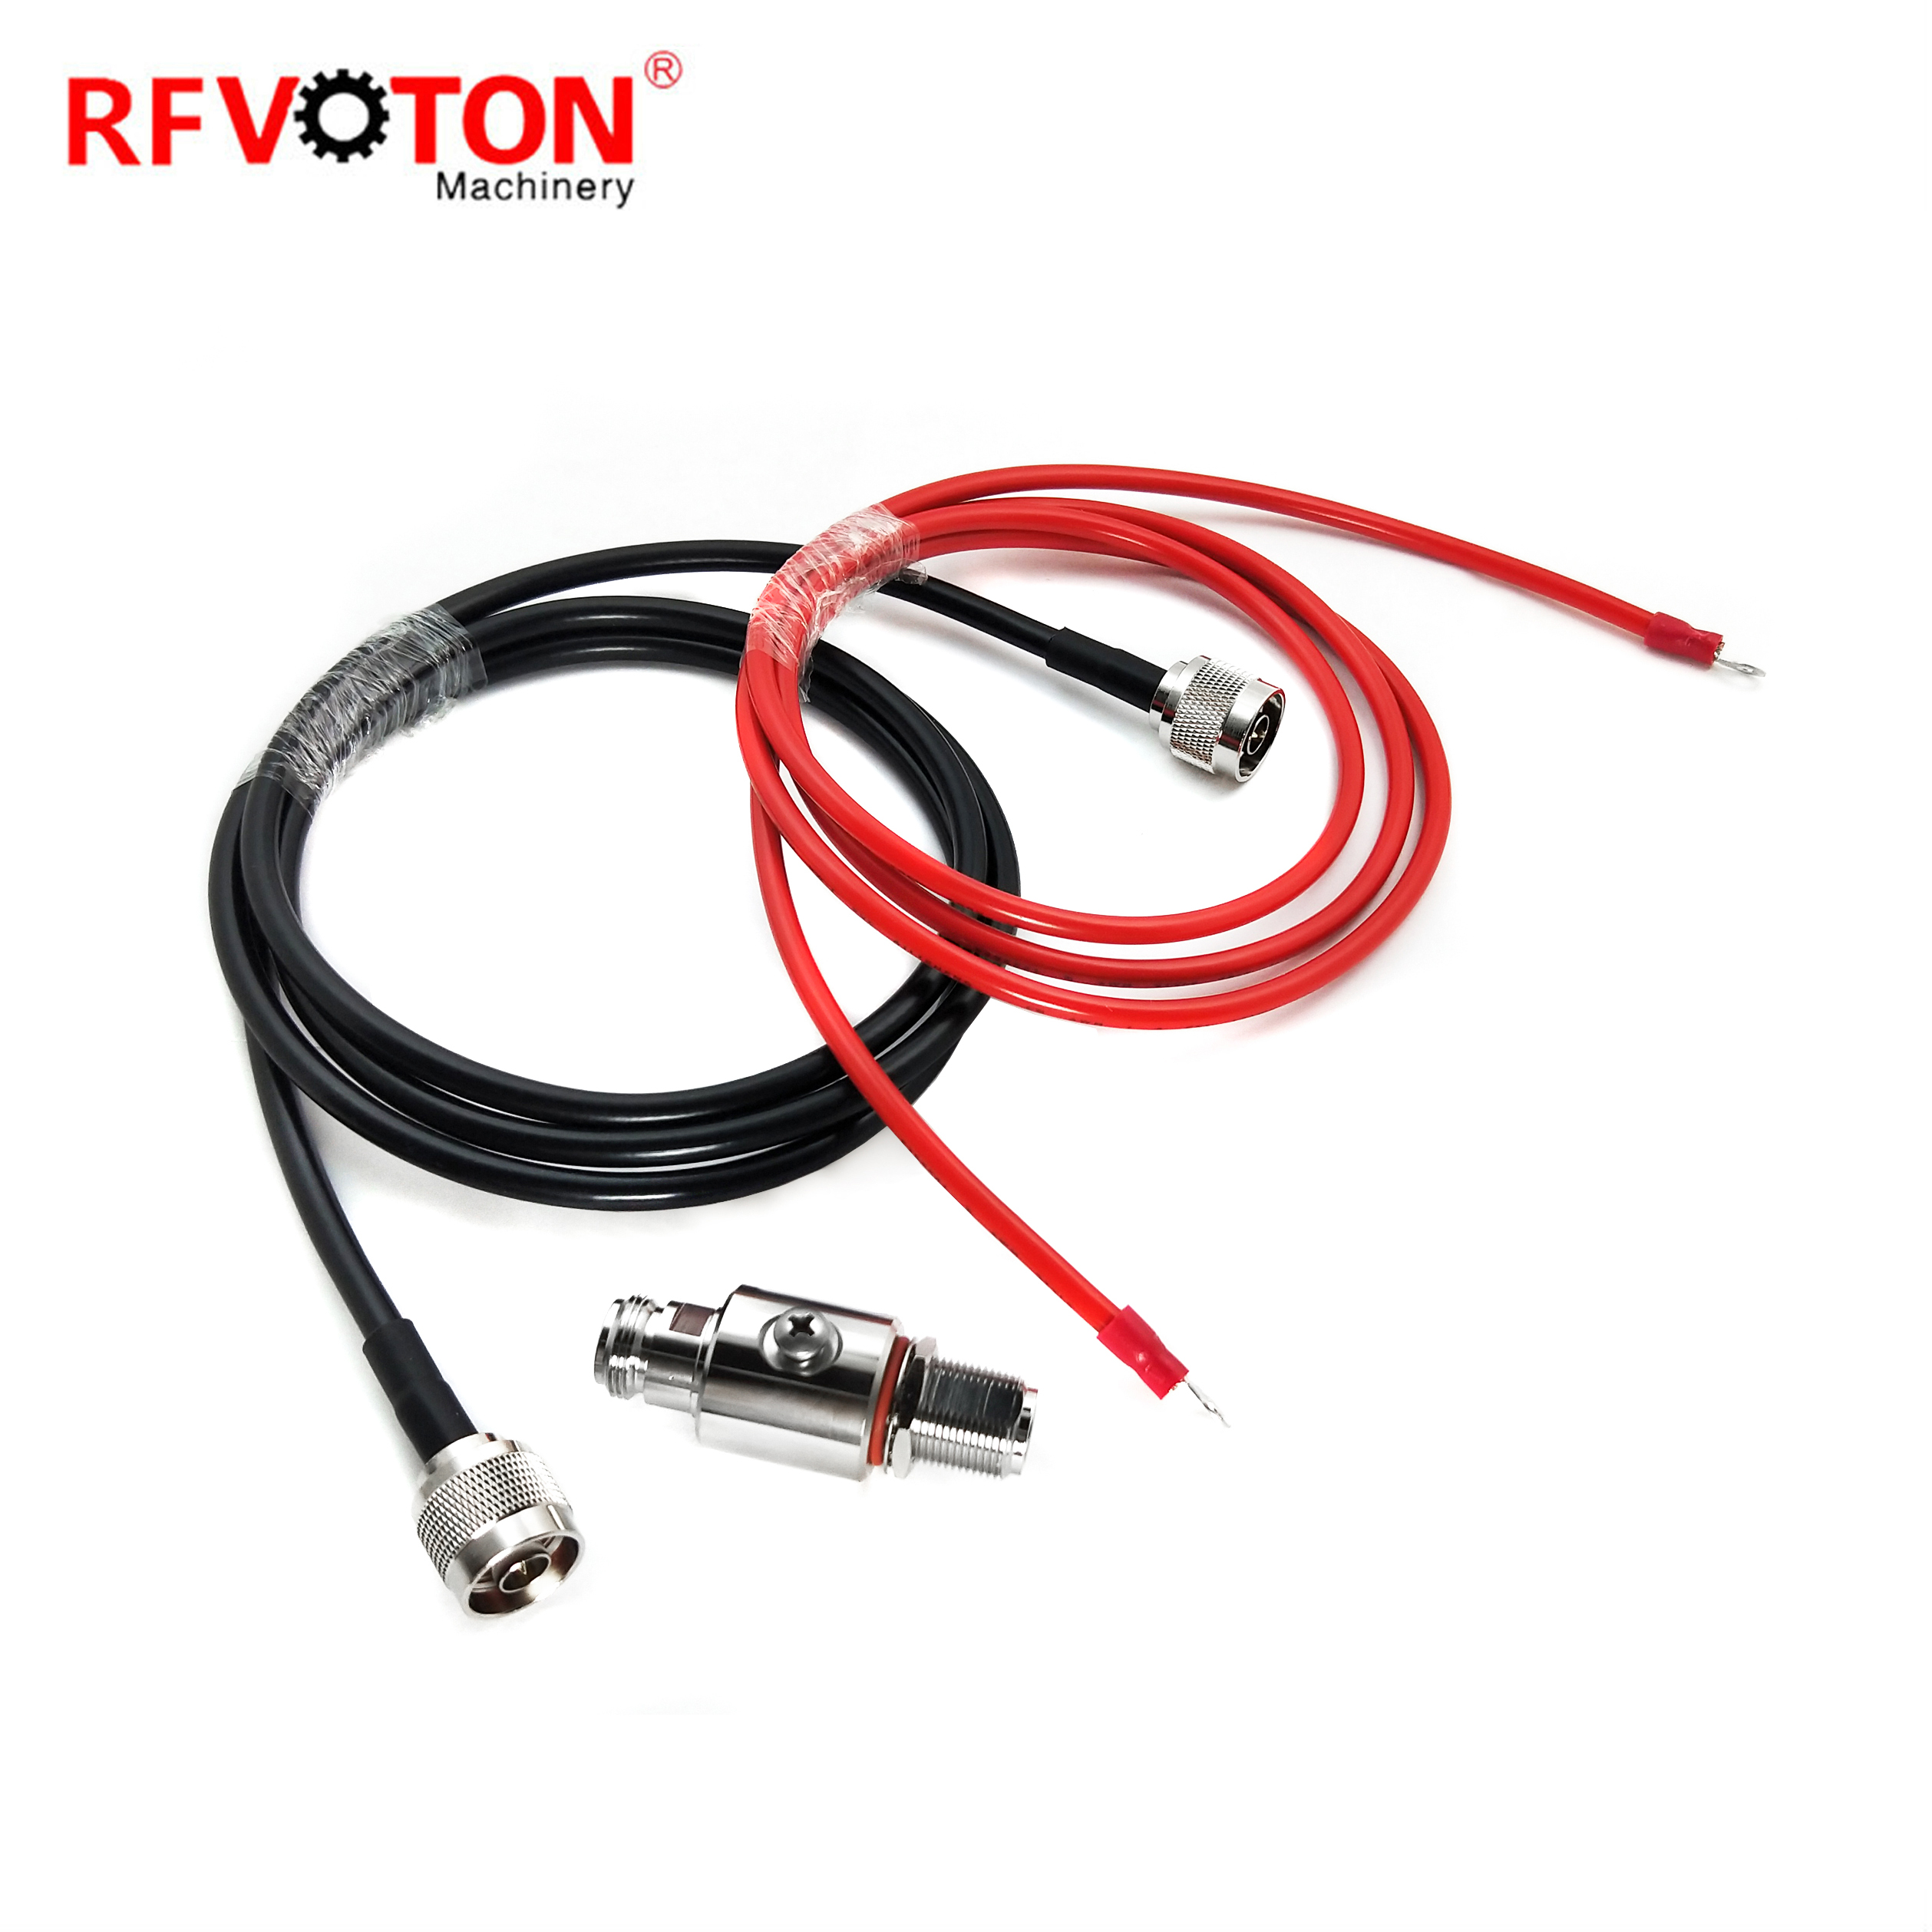 Arrestor DC-3G N Type Female to Female bulkhead jumper cable red 10AWG lmr240 length 1.5m Gas Discharge Tube